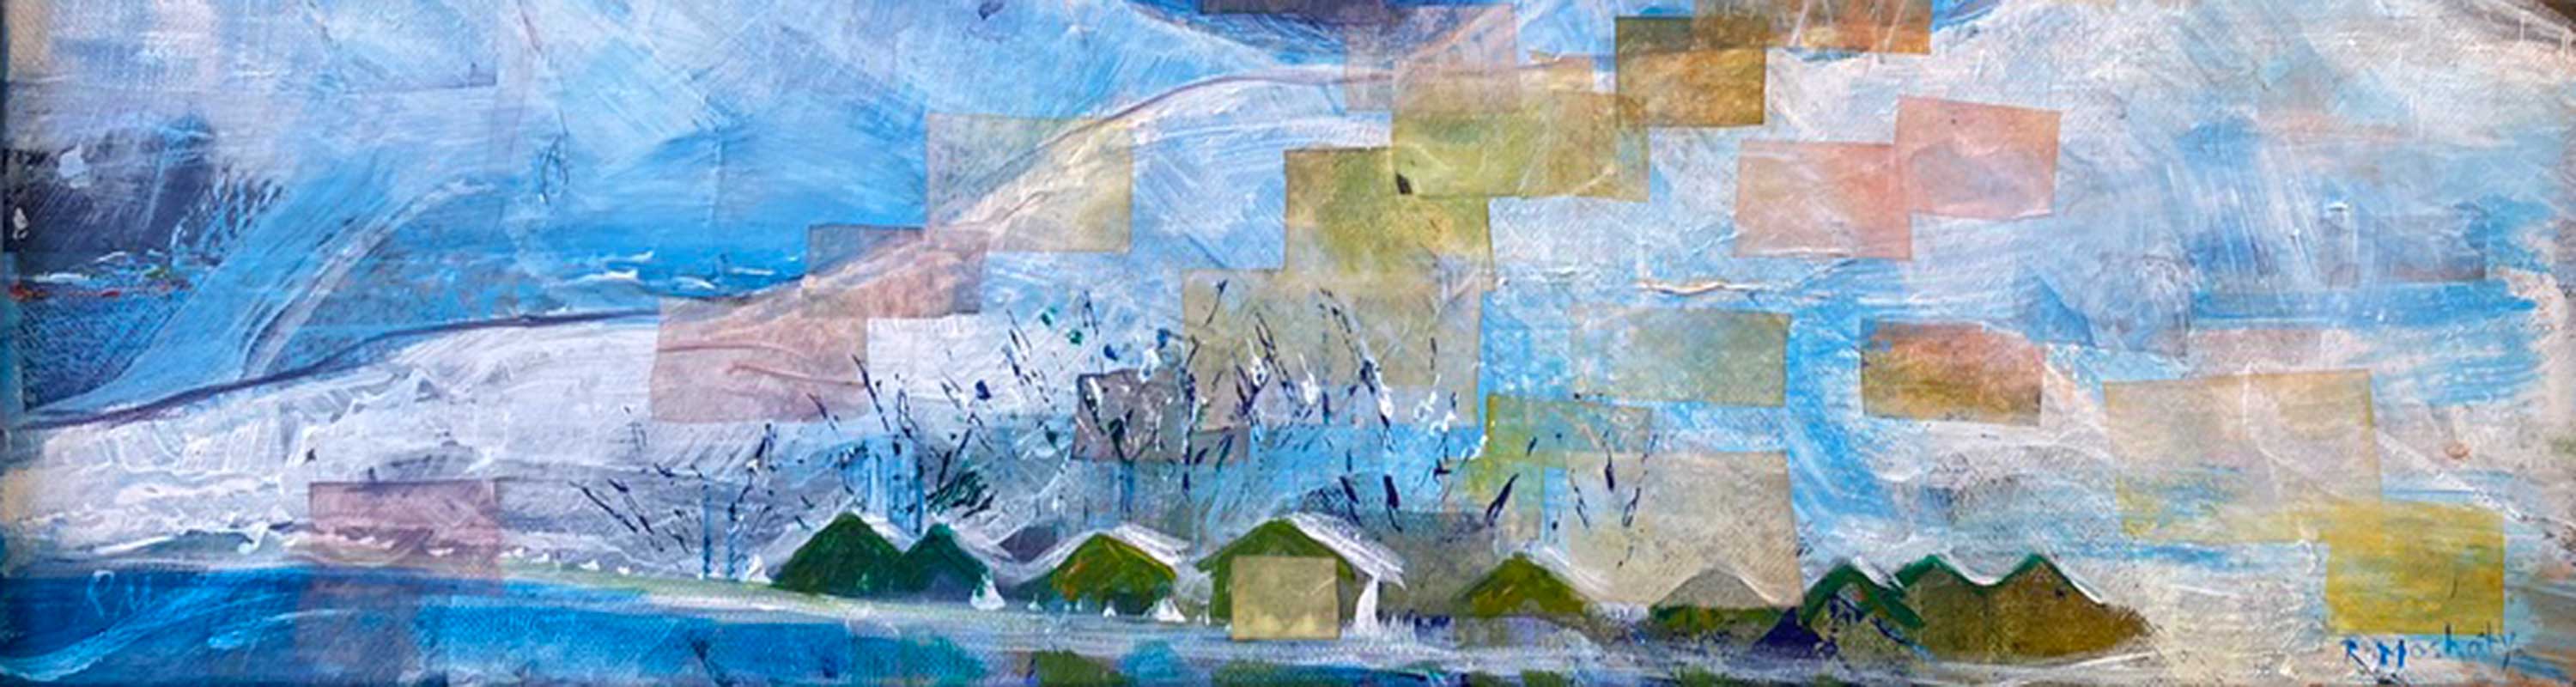 mixed media artwork depicting a winter scene with mountains in background